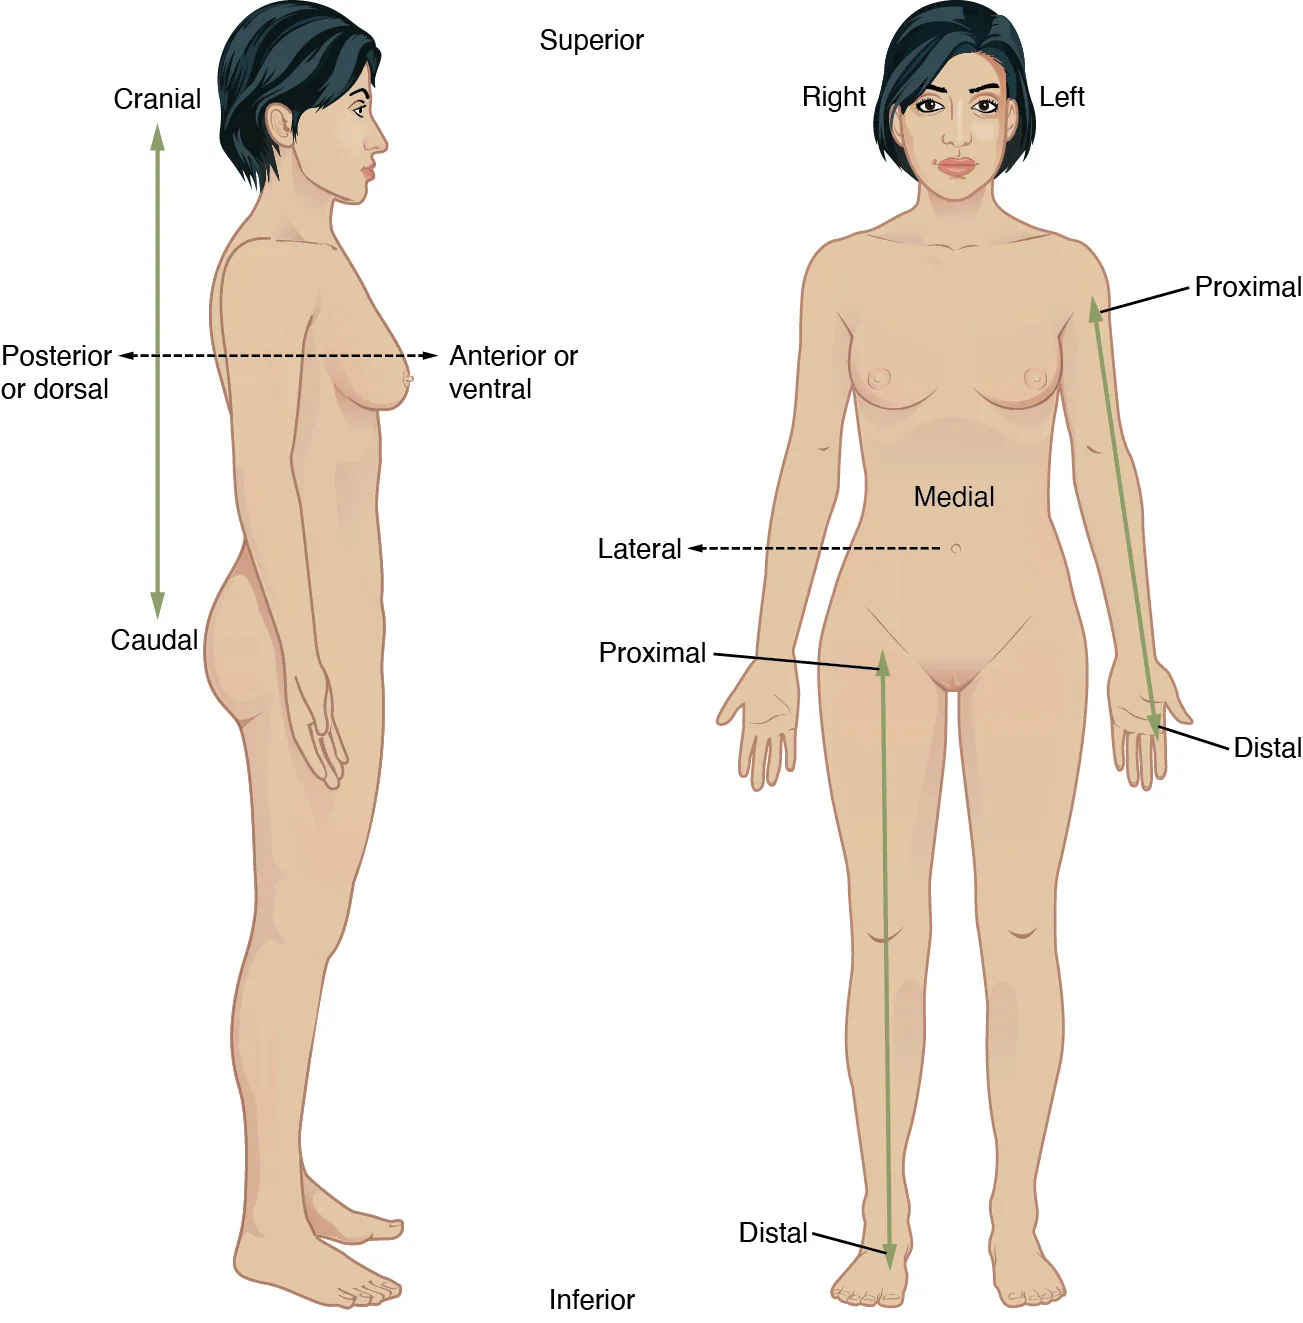 This illustration shows two diagrams: one of a side view of a female and the other of an anterior view of a female. Each diagram shows directional terms using double-sided arrows. The cranial-distal arrow runs vertically behind the torso and lower abdomen. The cranial arrow is pointing toward the head while the caudal arrow is pointing toward the tail bone. The posterior/anterior arrow is running horizontally through the back and chest. The posterior or dorsal arrow is pointing toward the back while the anterior, or ventral arrow, is pointing toward the abdomen. On the anterior view, the proximal/distal arrow is on the right arm. The proximal arrow is pointing up toward the shoulder while the distal arrow is pointing down toward the hand. The lateral-medial arrow is a horizontal arrow on the abdomen. The medial arrow is pointing toward the navel while the lateral arrow is pointing away from the body to the right. Right refers to the right side of the woman’s body from her perspective while left refers to the left side of the woman’s body from her perspective.